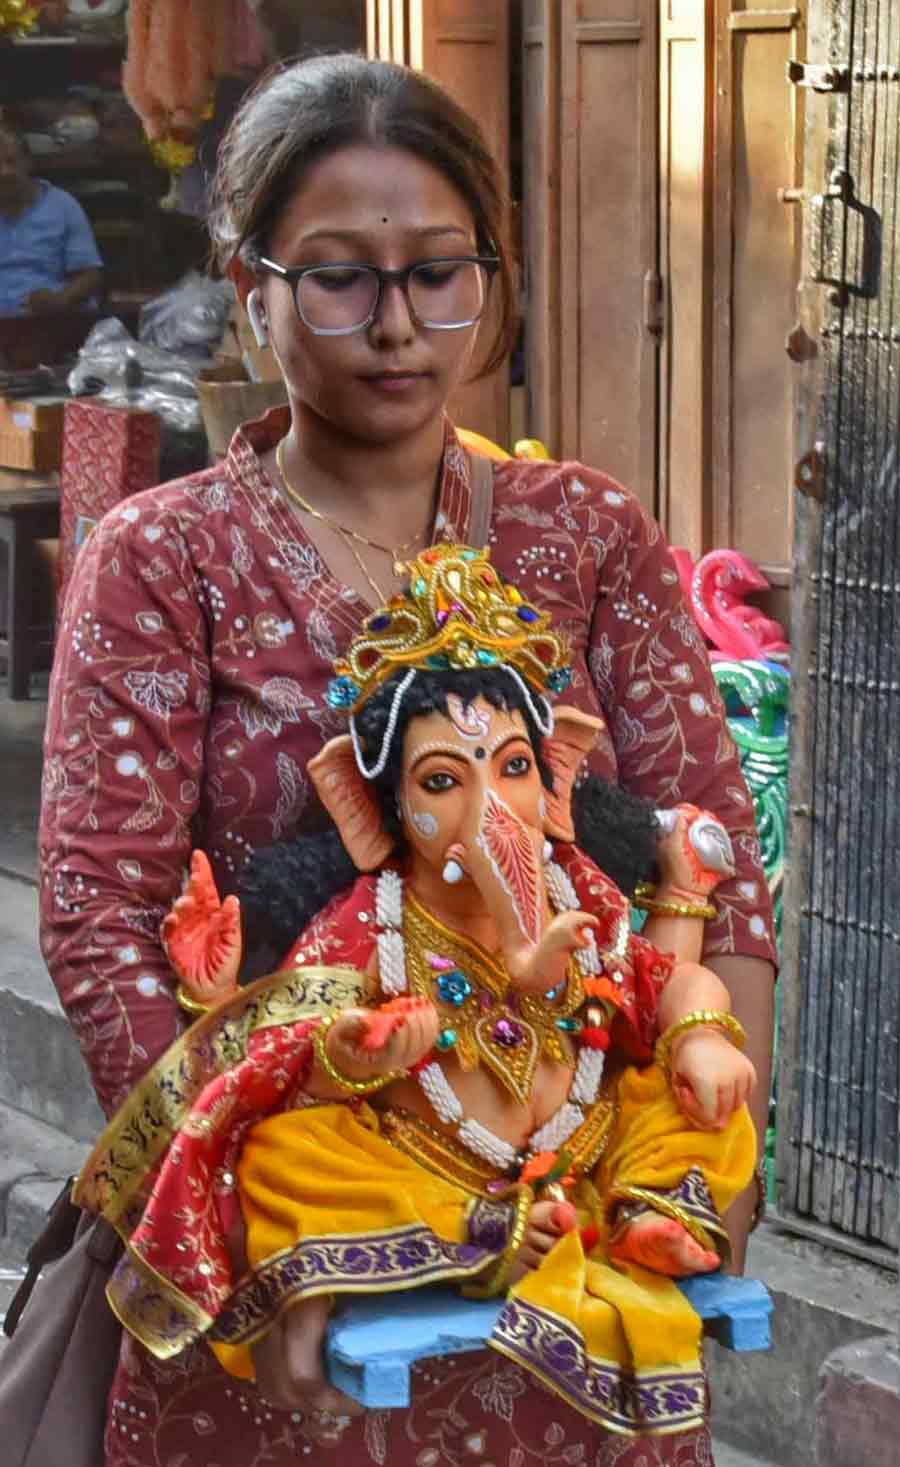 A woman carries an idol of Ganesh at Kumartuli on Tuesday. According to Drik Panchang, the festival is celebrated in the Shukla Paksha of the Bhadrapada month which, as per the Gregorian calendar, falls in August or September. This year, Ganesh Chaturthi will begin on August 31.